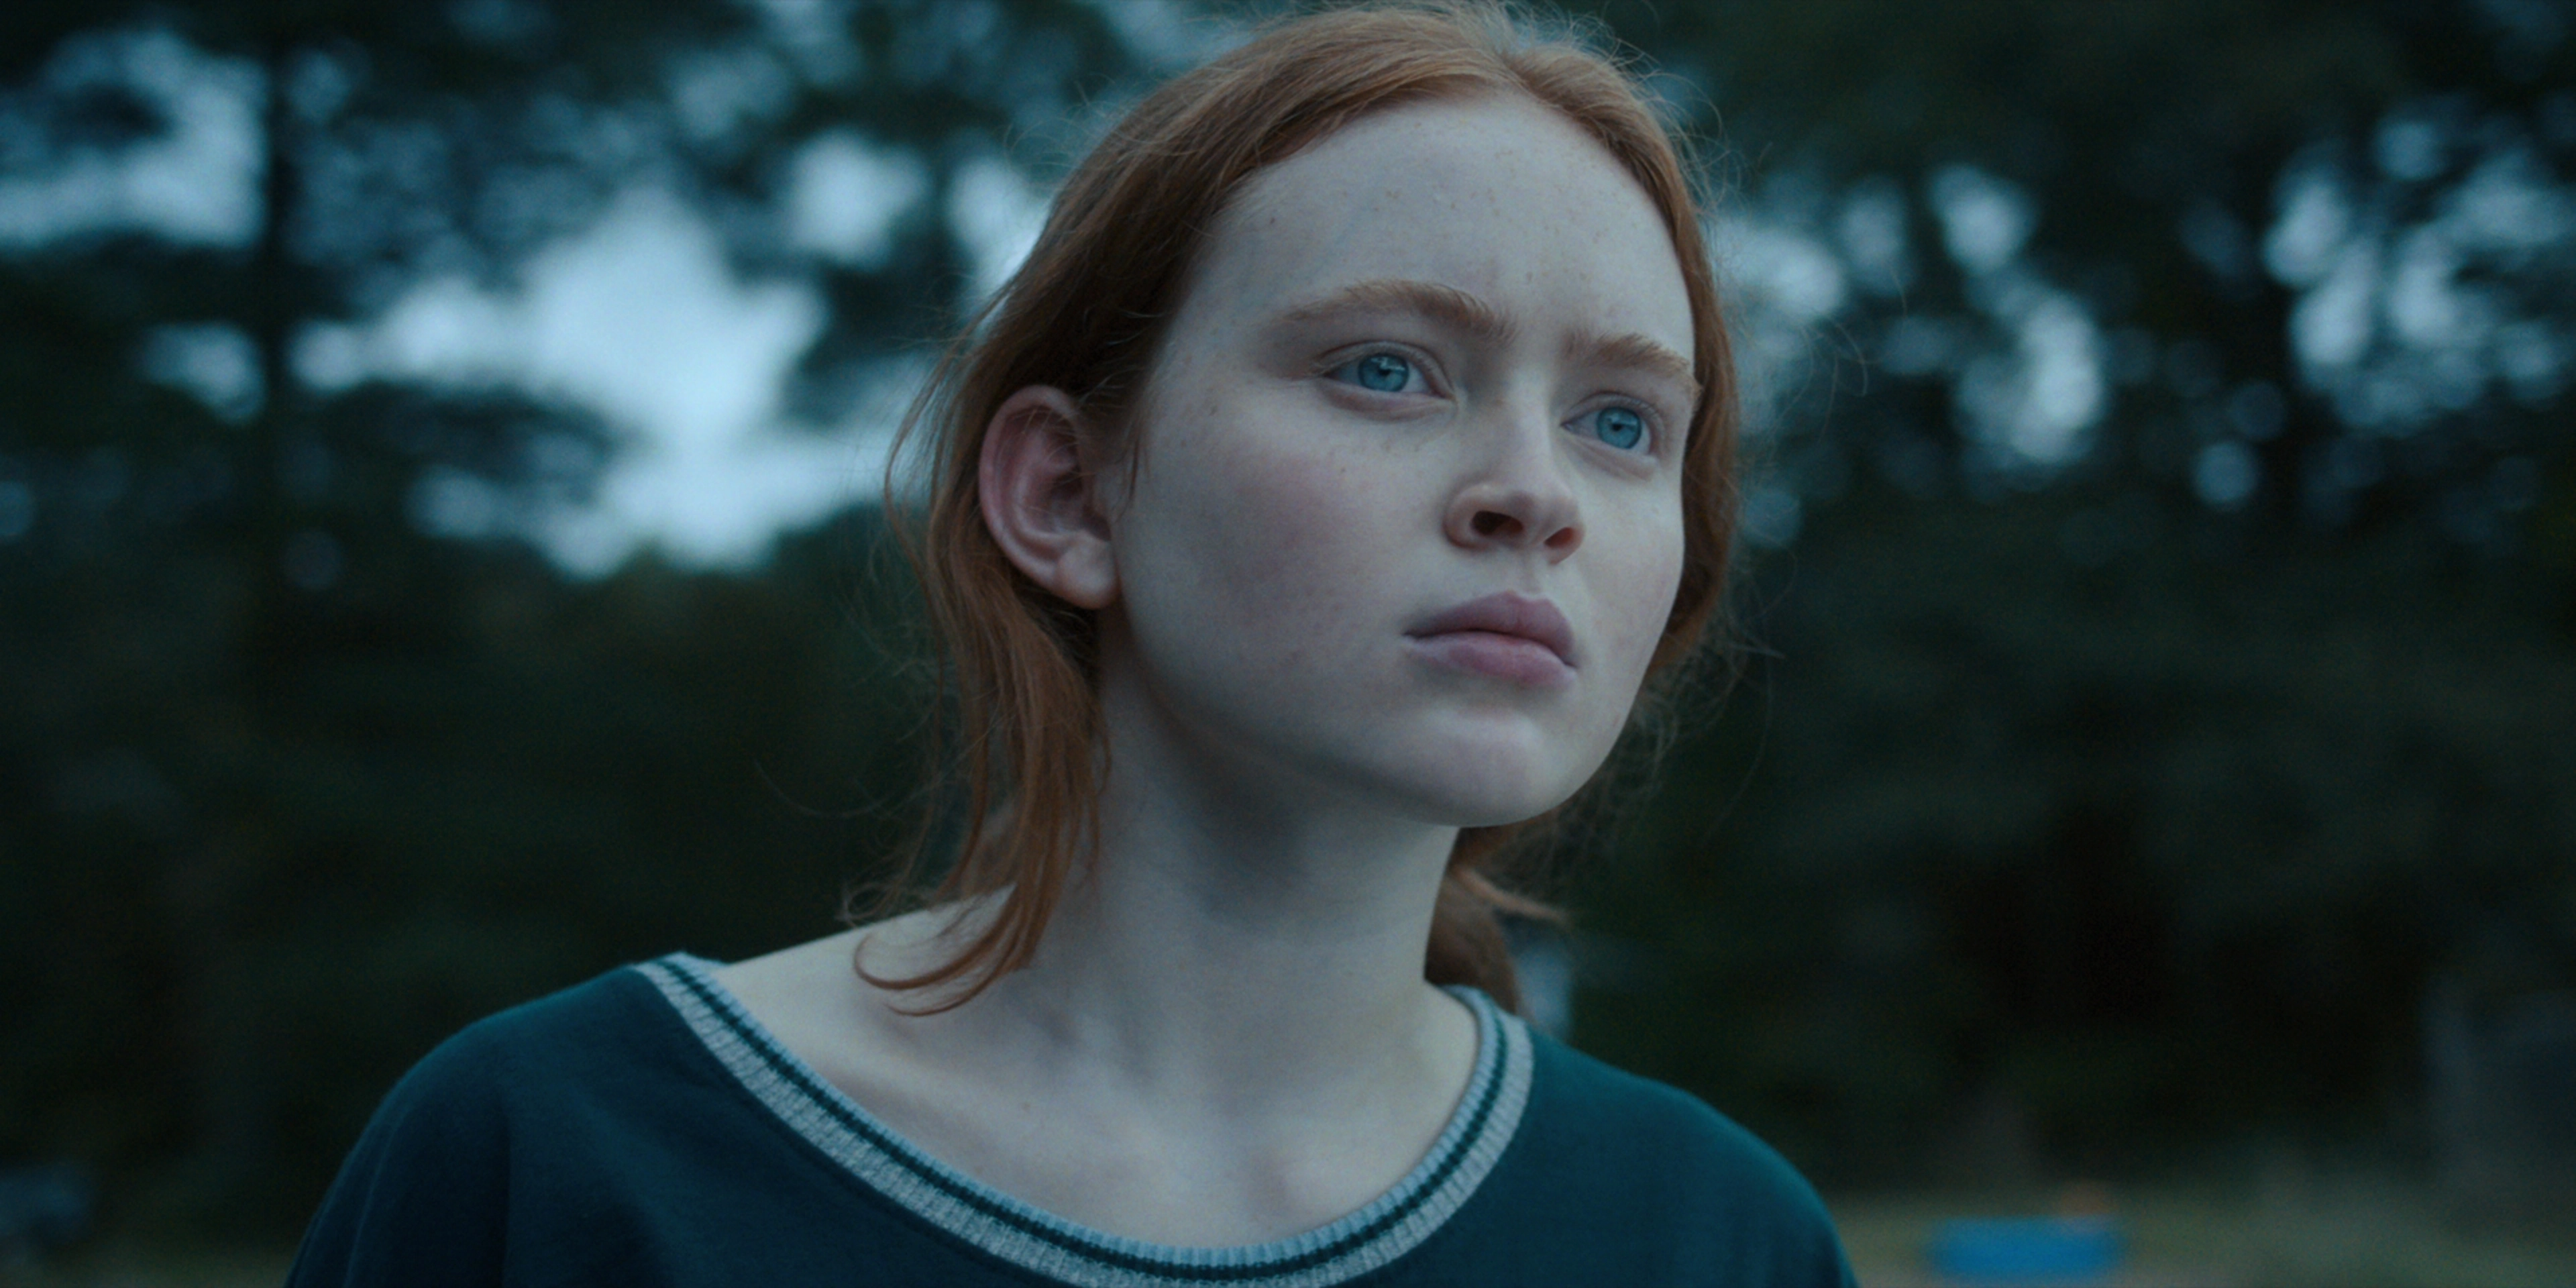 Stranger Things - Max Mayfield, portrayed by Sadie Sink. A pale young woman with red hair, she looks into the distance with a confused but intent expression.